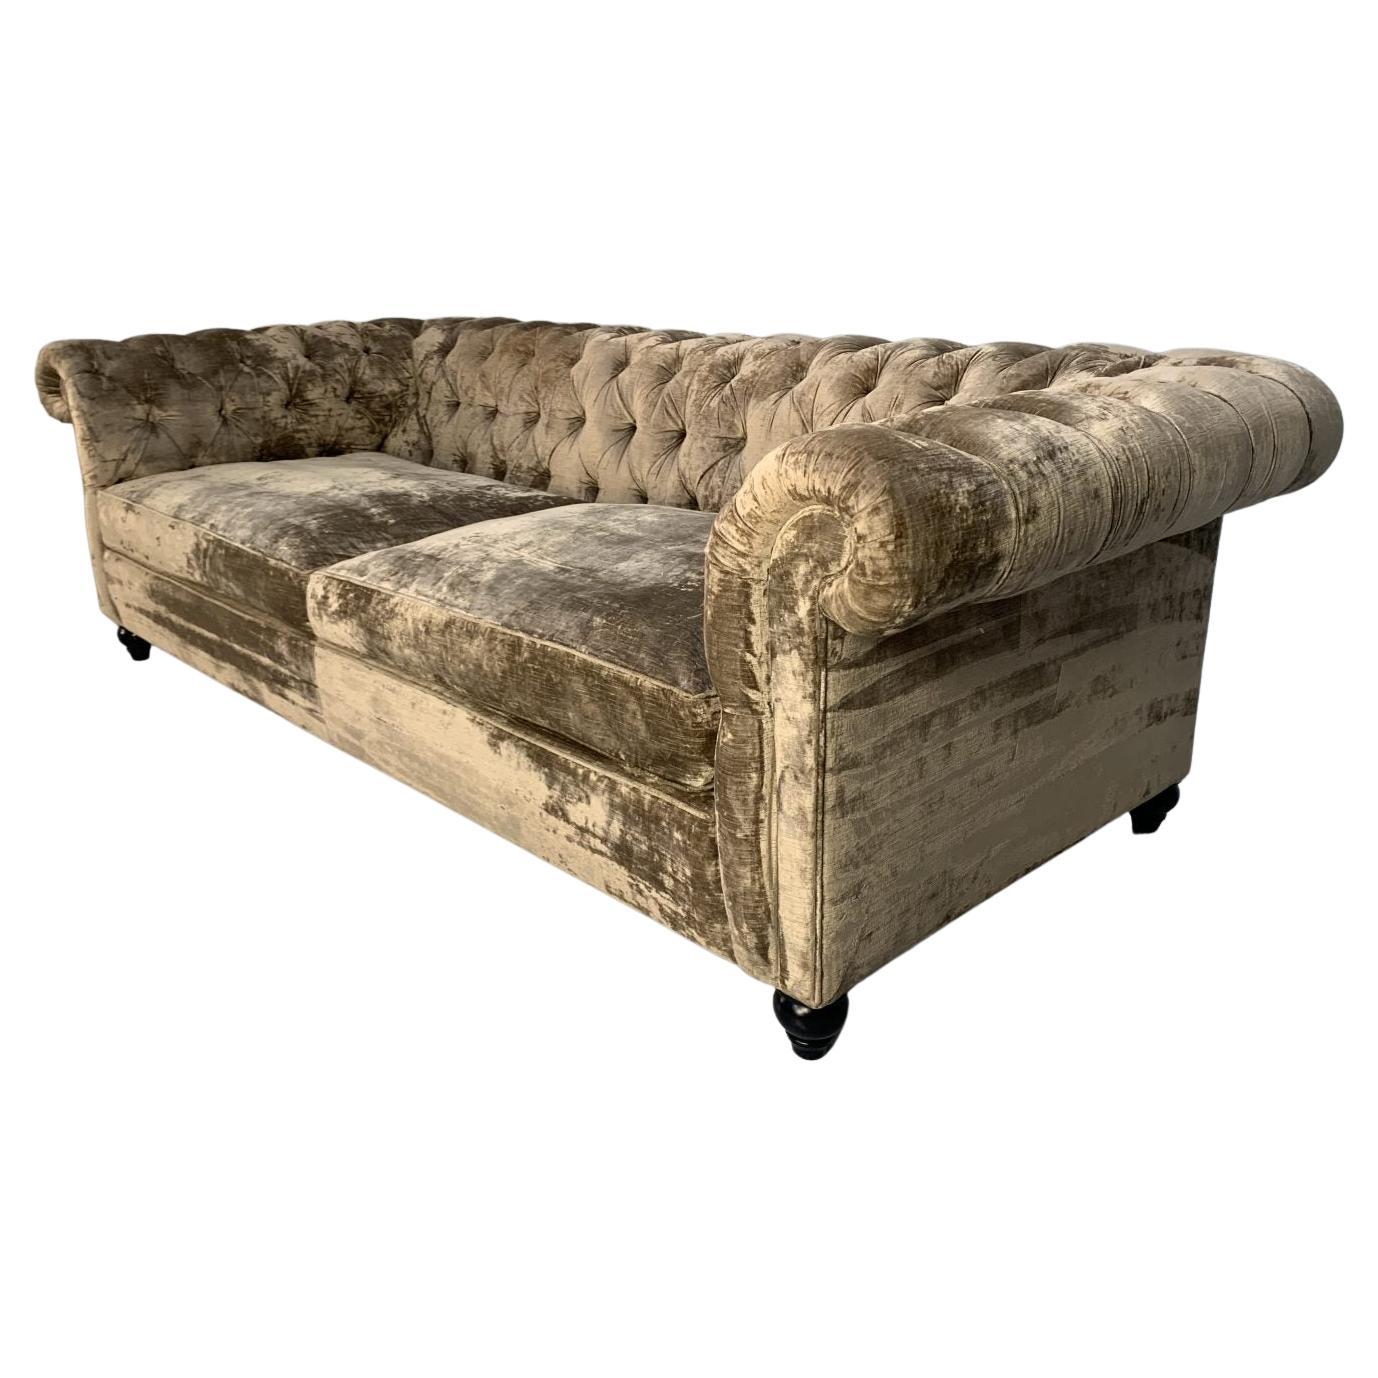 Duresta “Connaught” Grand Chesterfield Sofa – In Pale Gold Mink Brown “Rembrandt